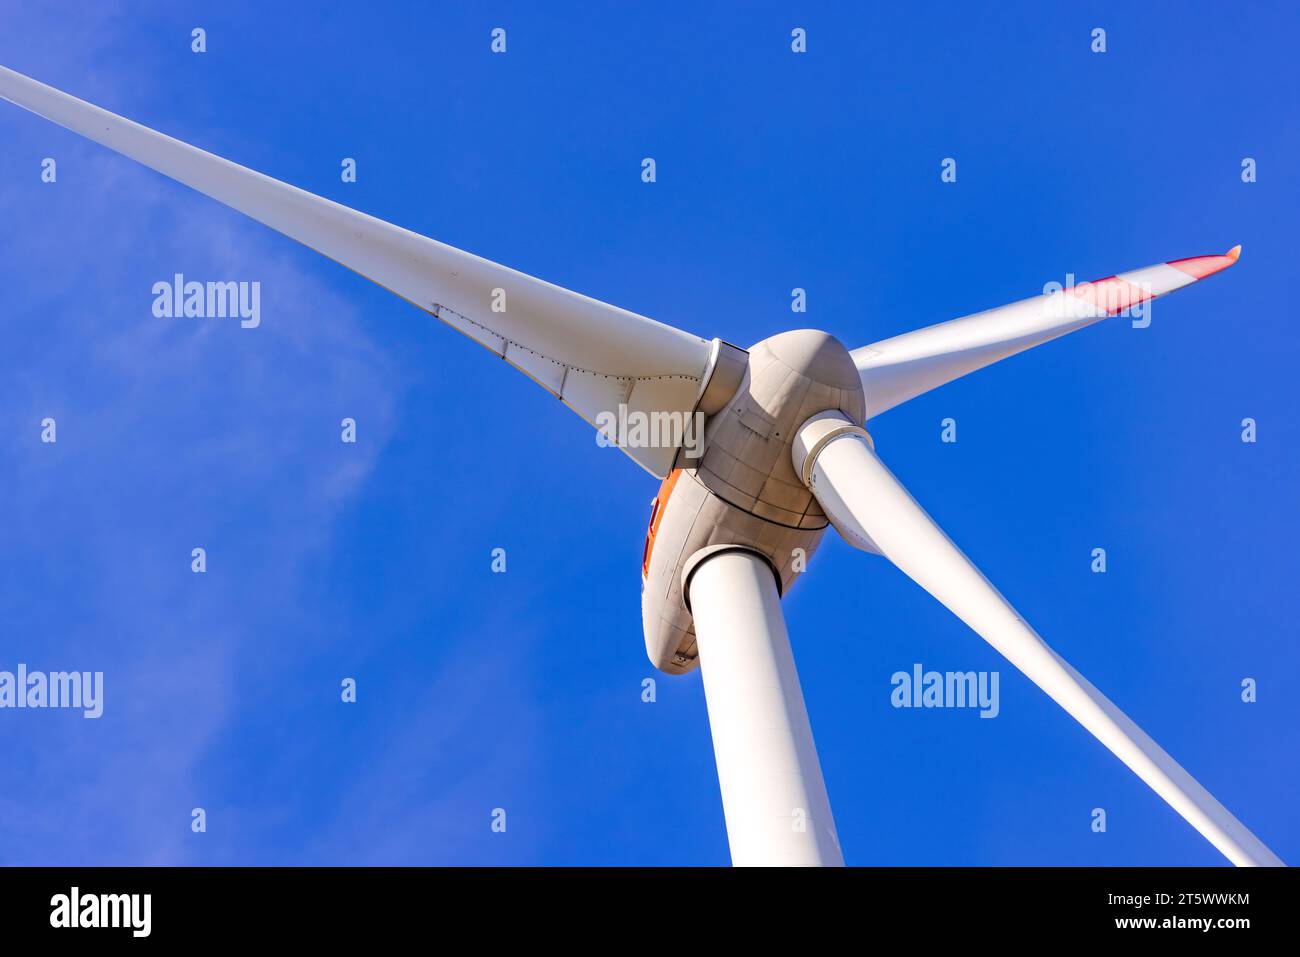 Details of rotor and blades of a wind turbine cropped in front of a blue sky Stock Photo